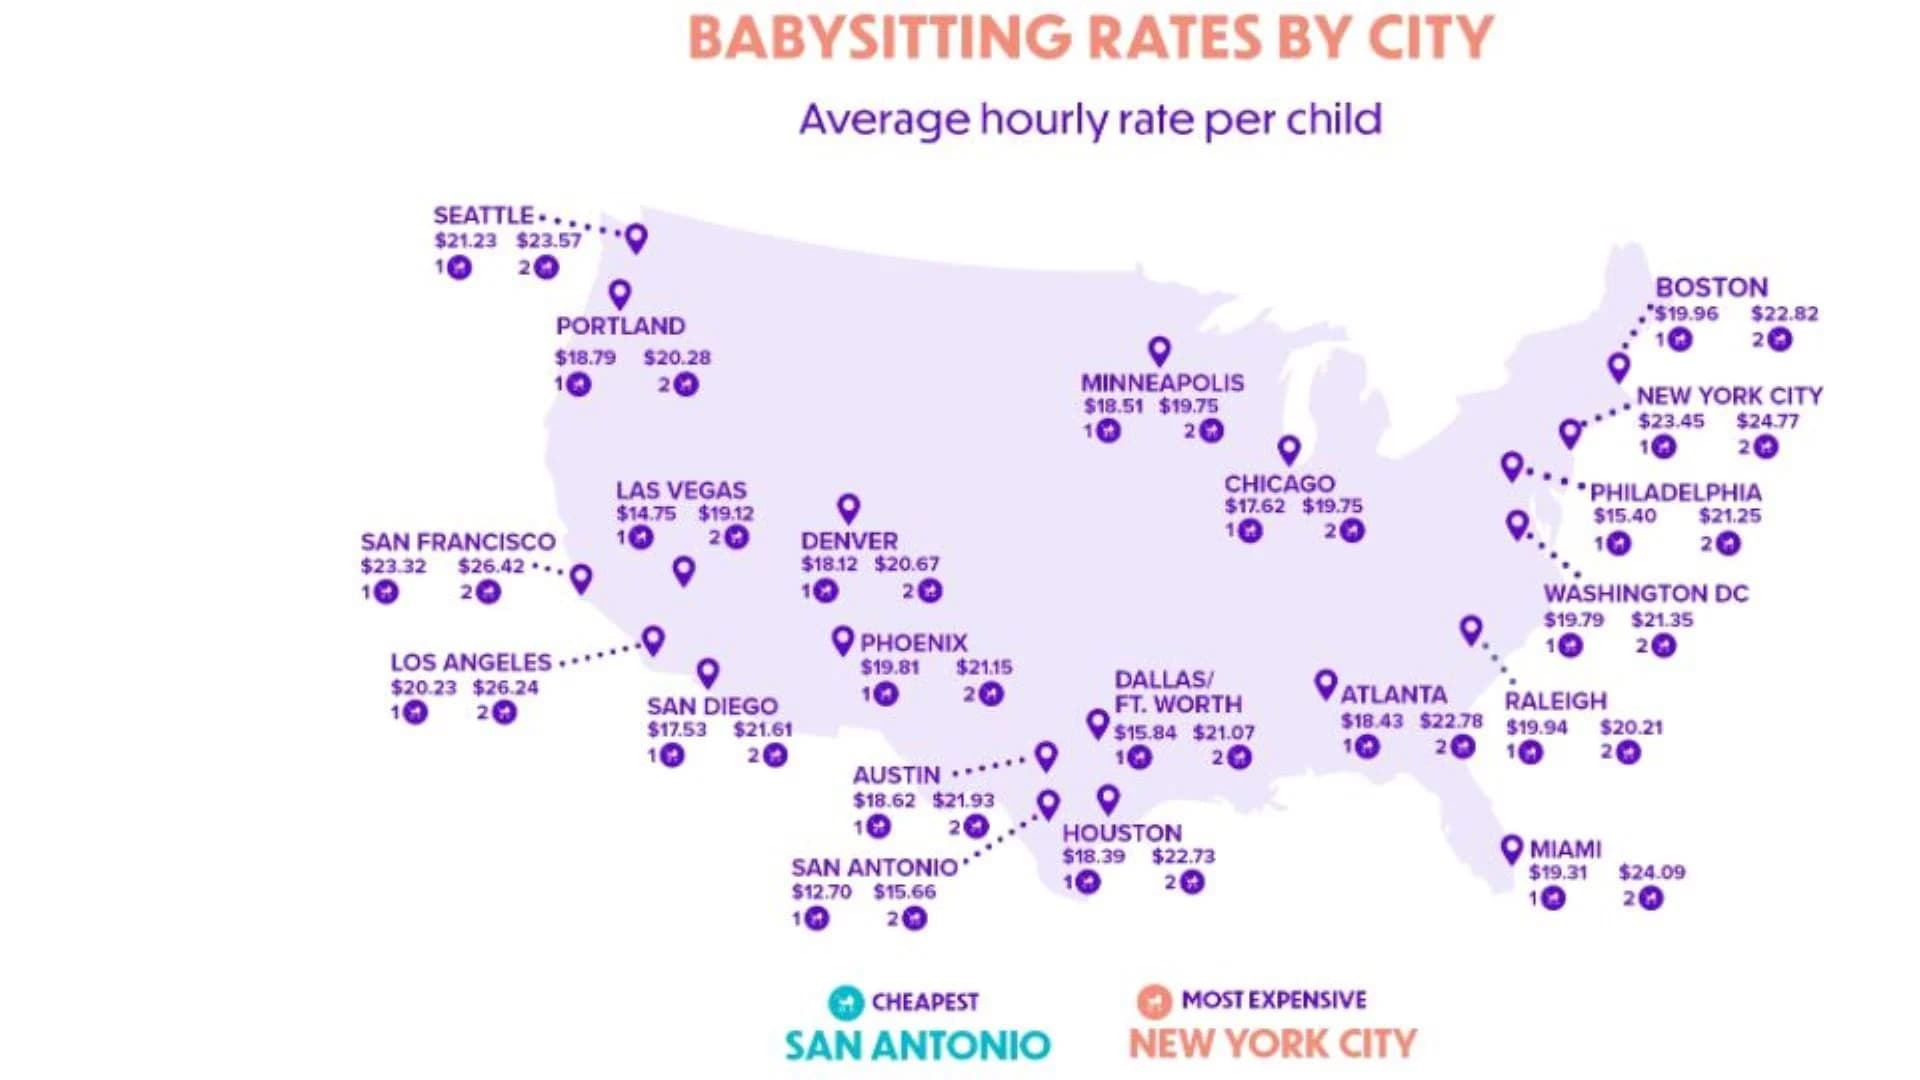 Survey: NYC has most expensive babysitting rates